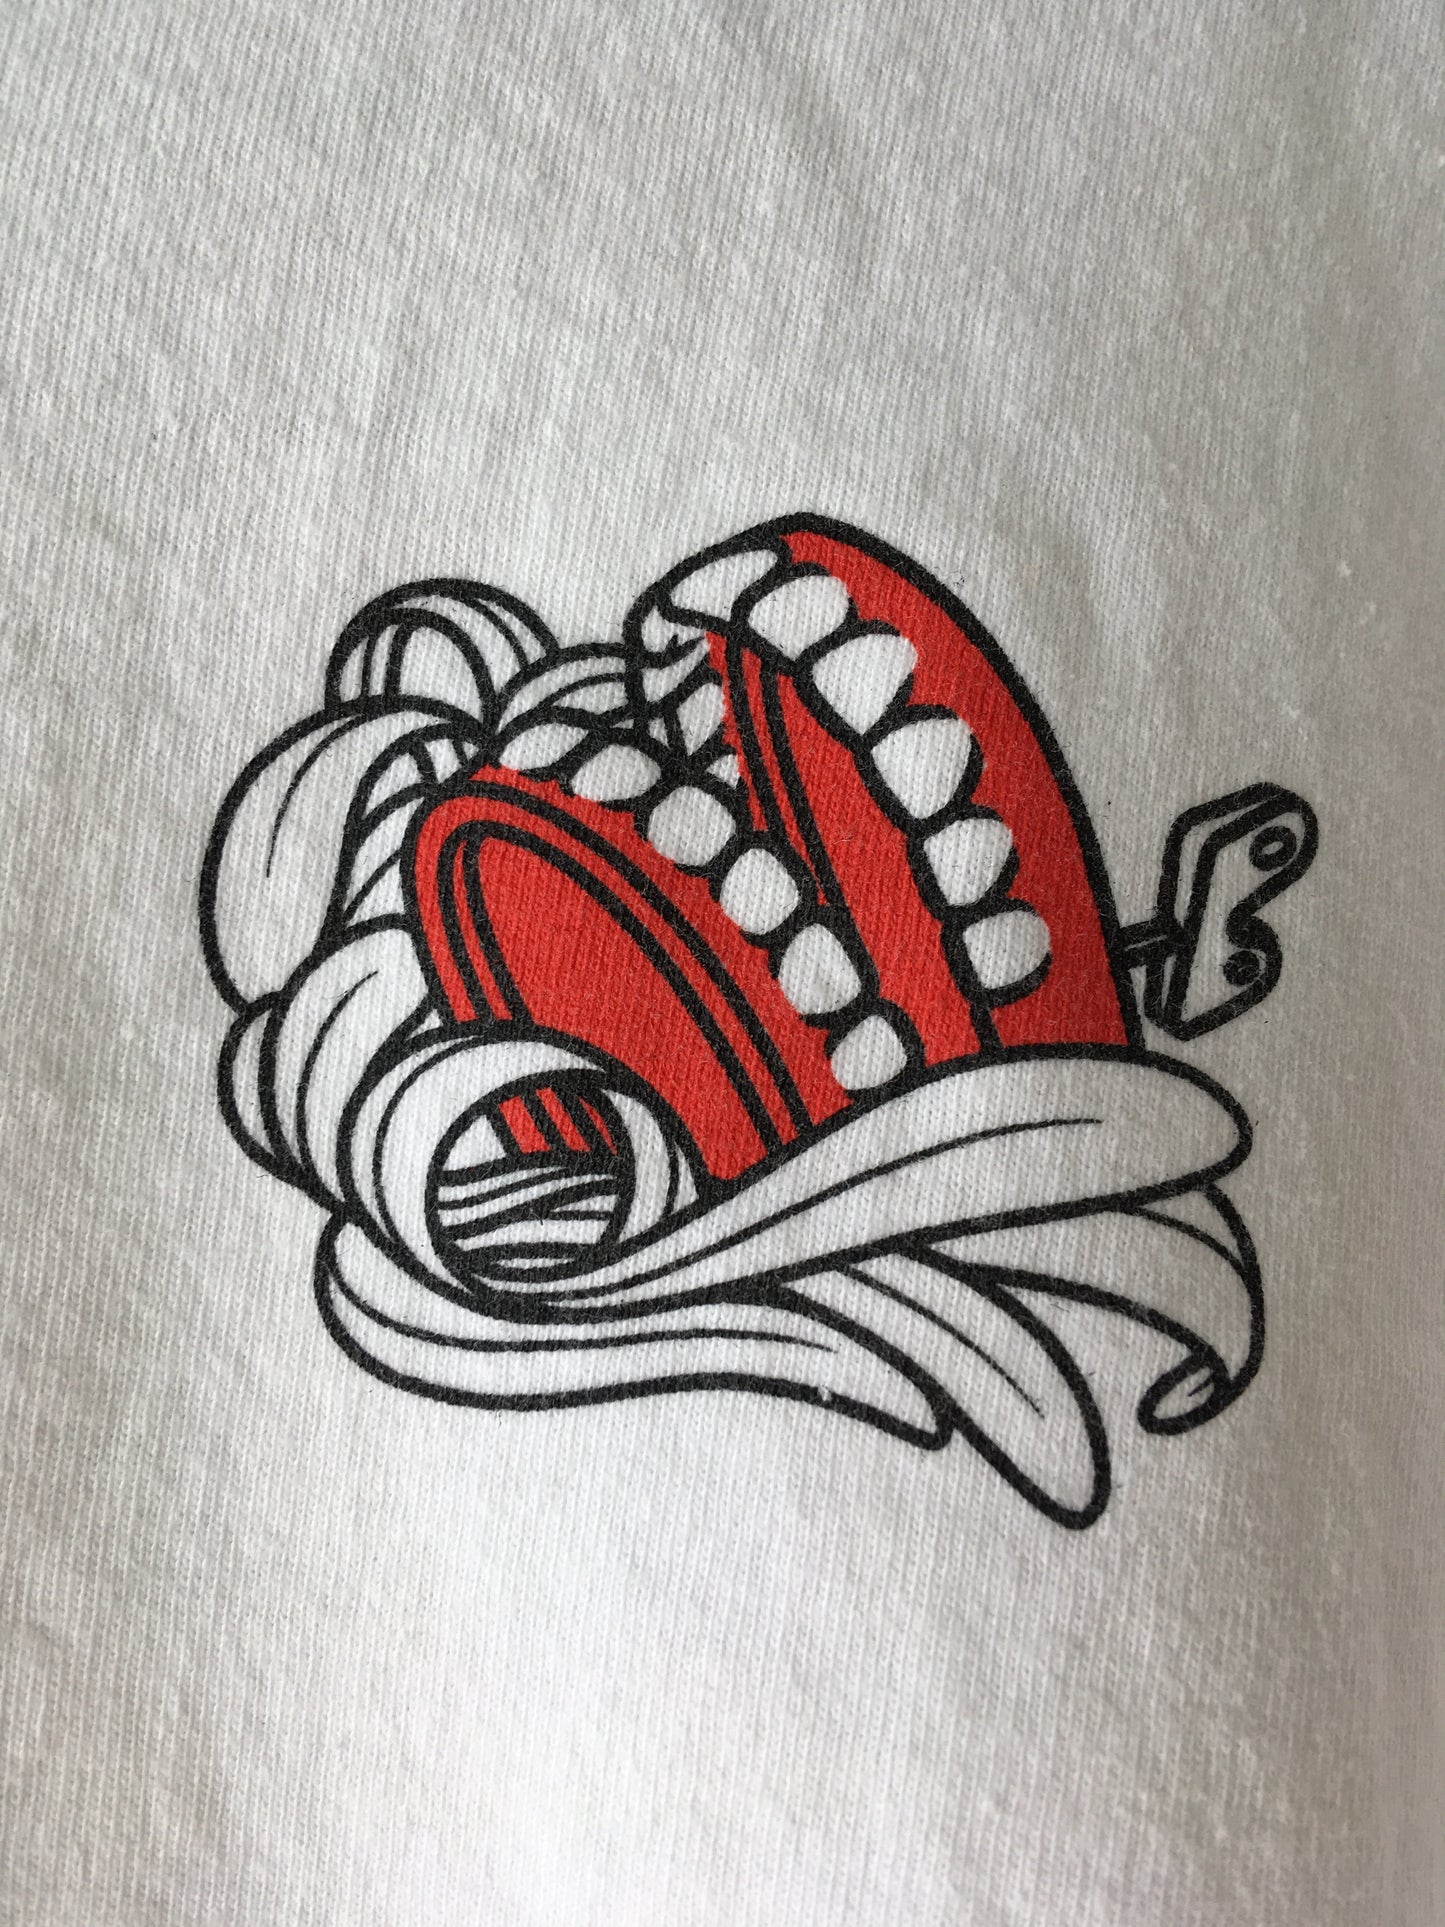 Roosters and Teeth T-shirt